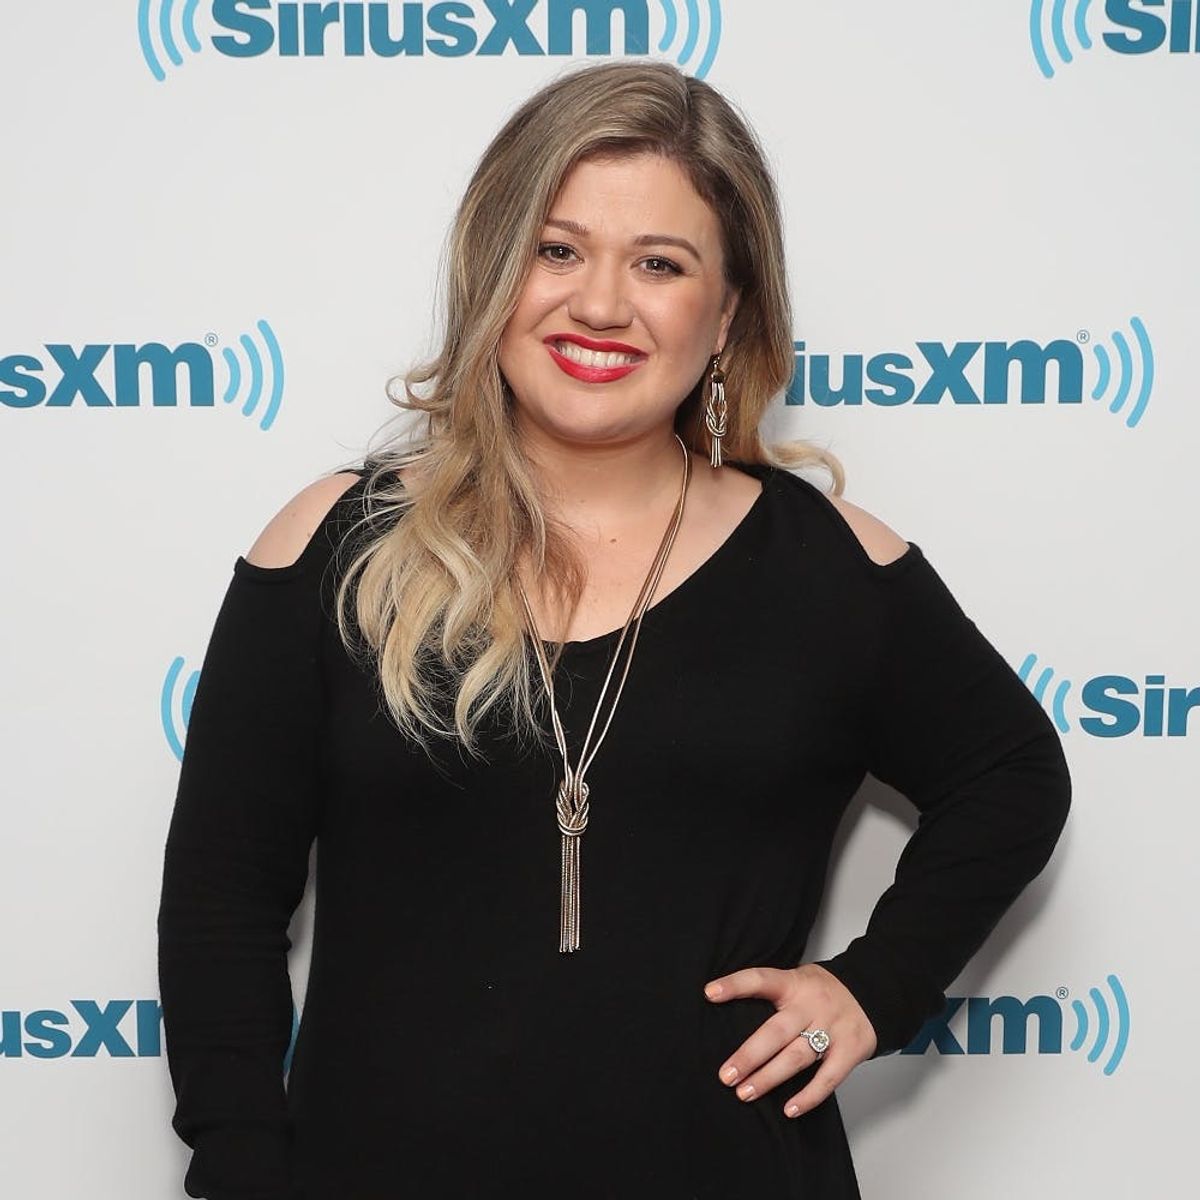 Kelly Clarkson Shares Heartbreaking Struggles With Body Image: “I Was Miserable”